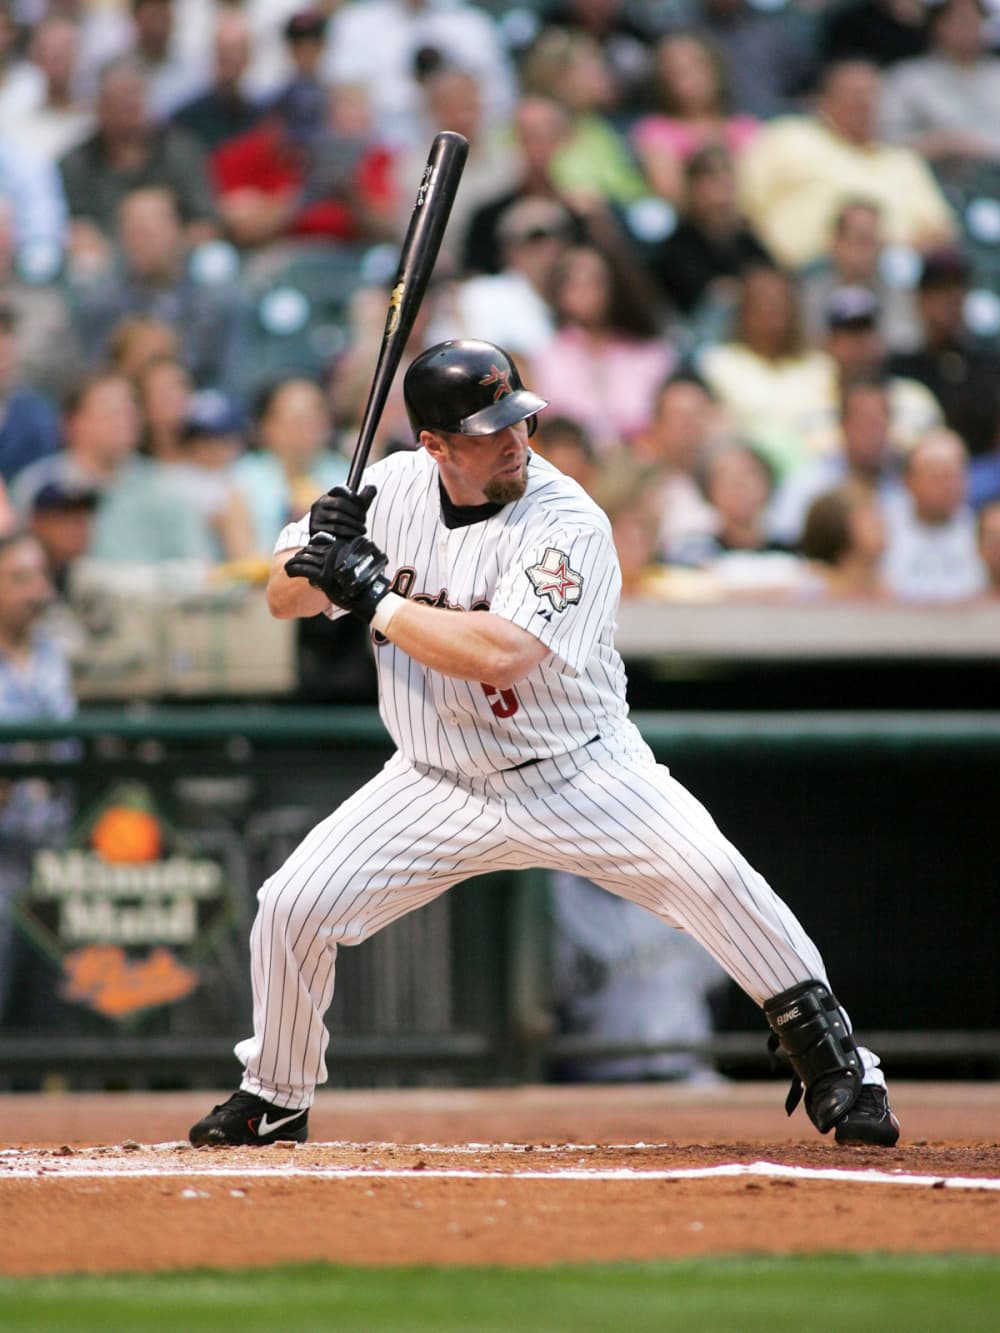 Jeff Bagwell on Hall of Fame: 'It's a big deal